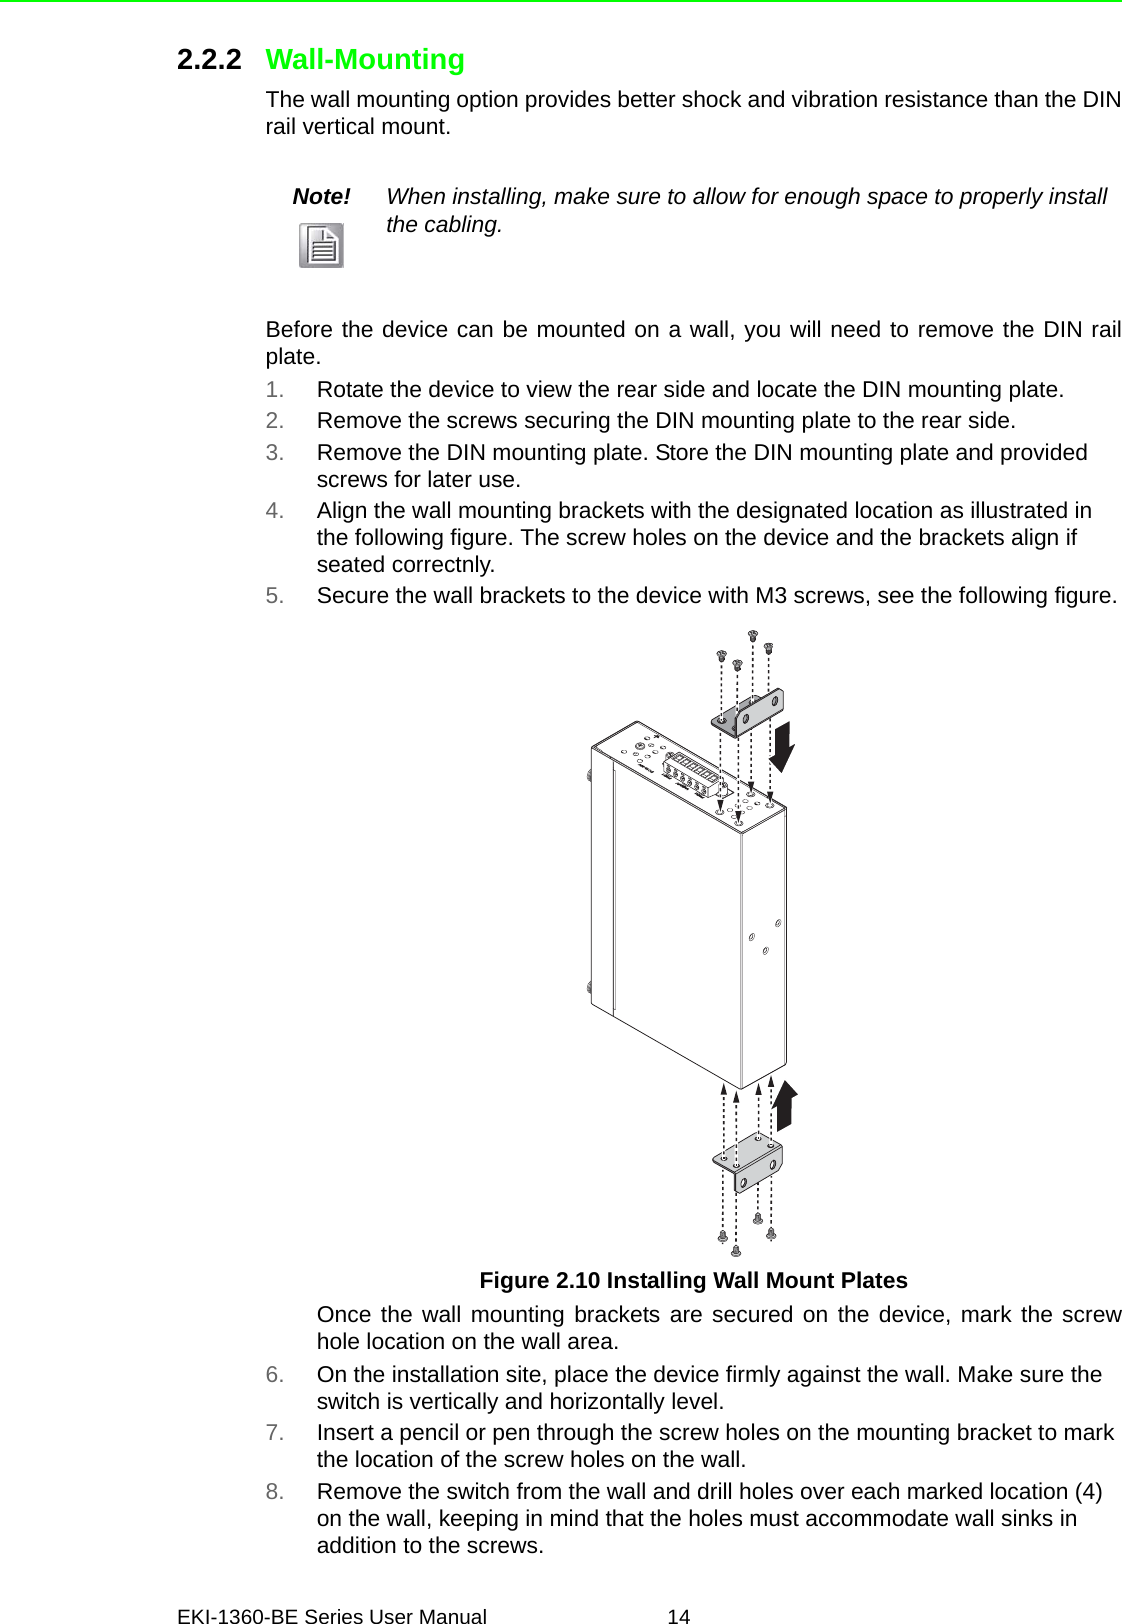 EKI-1360-BE Series User Manual 142.2.2 Wall-MountingThe wall mounting option provides better shock and vibration resistance than the DINrail vertical mount.Before the device can be mounted on a wall, you will need to remove the DIN railplate.1. Rotate the device to view the rear side and locate the DIN mounting plate.2. Remove the screws securing the DIN mounting plate to the rear side.3. Remove the DIN mounting plate. Store the DIN mounting plate and provided screws for later use.4. Align the wall mounting brackets with the designated location as illustrated in the following figure. The screw holes on the device and the brackets align if seated correctnly.5. Secure the wall brackets to the device with M3 screws, see the following figure.Figure 2.10 Installing Wall Mount PlatesOnce the wall mounting brackets are secured on the device, mark the screwhole location on the wall area.6. On the installation site, place the device firmly against the wall. Make sure the switch is vertically and horizontally level.7. Insert a pencil or pen through the screw holes on the mounting bracket to mark the location of the screw holes on the wall.8. Remove the switch from the wall and drill holes over each marked location (4) on the wall, keeping in mind that the holes must accommodate wall sinks in addition to the screws.Note! When installing, make sure to allow for enough space to properly install the cabling.